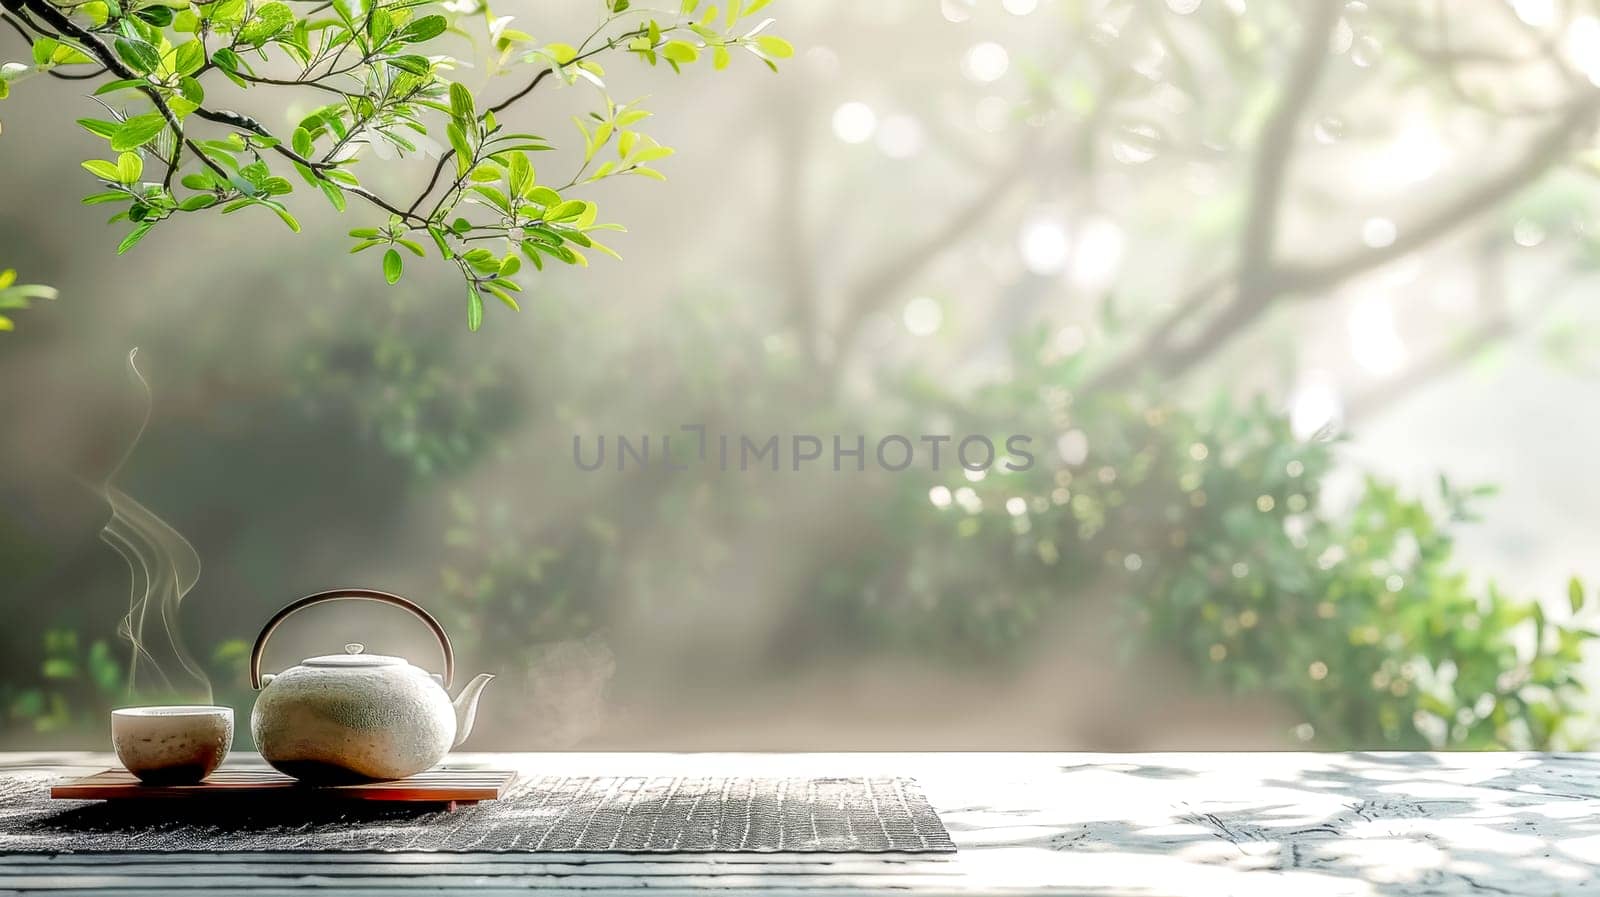 Tranquil tea time in misty garden setting by Edophoto